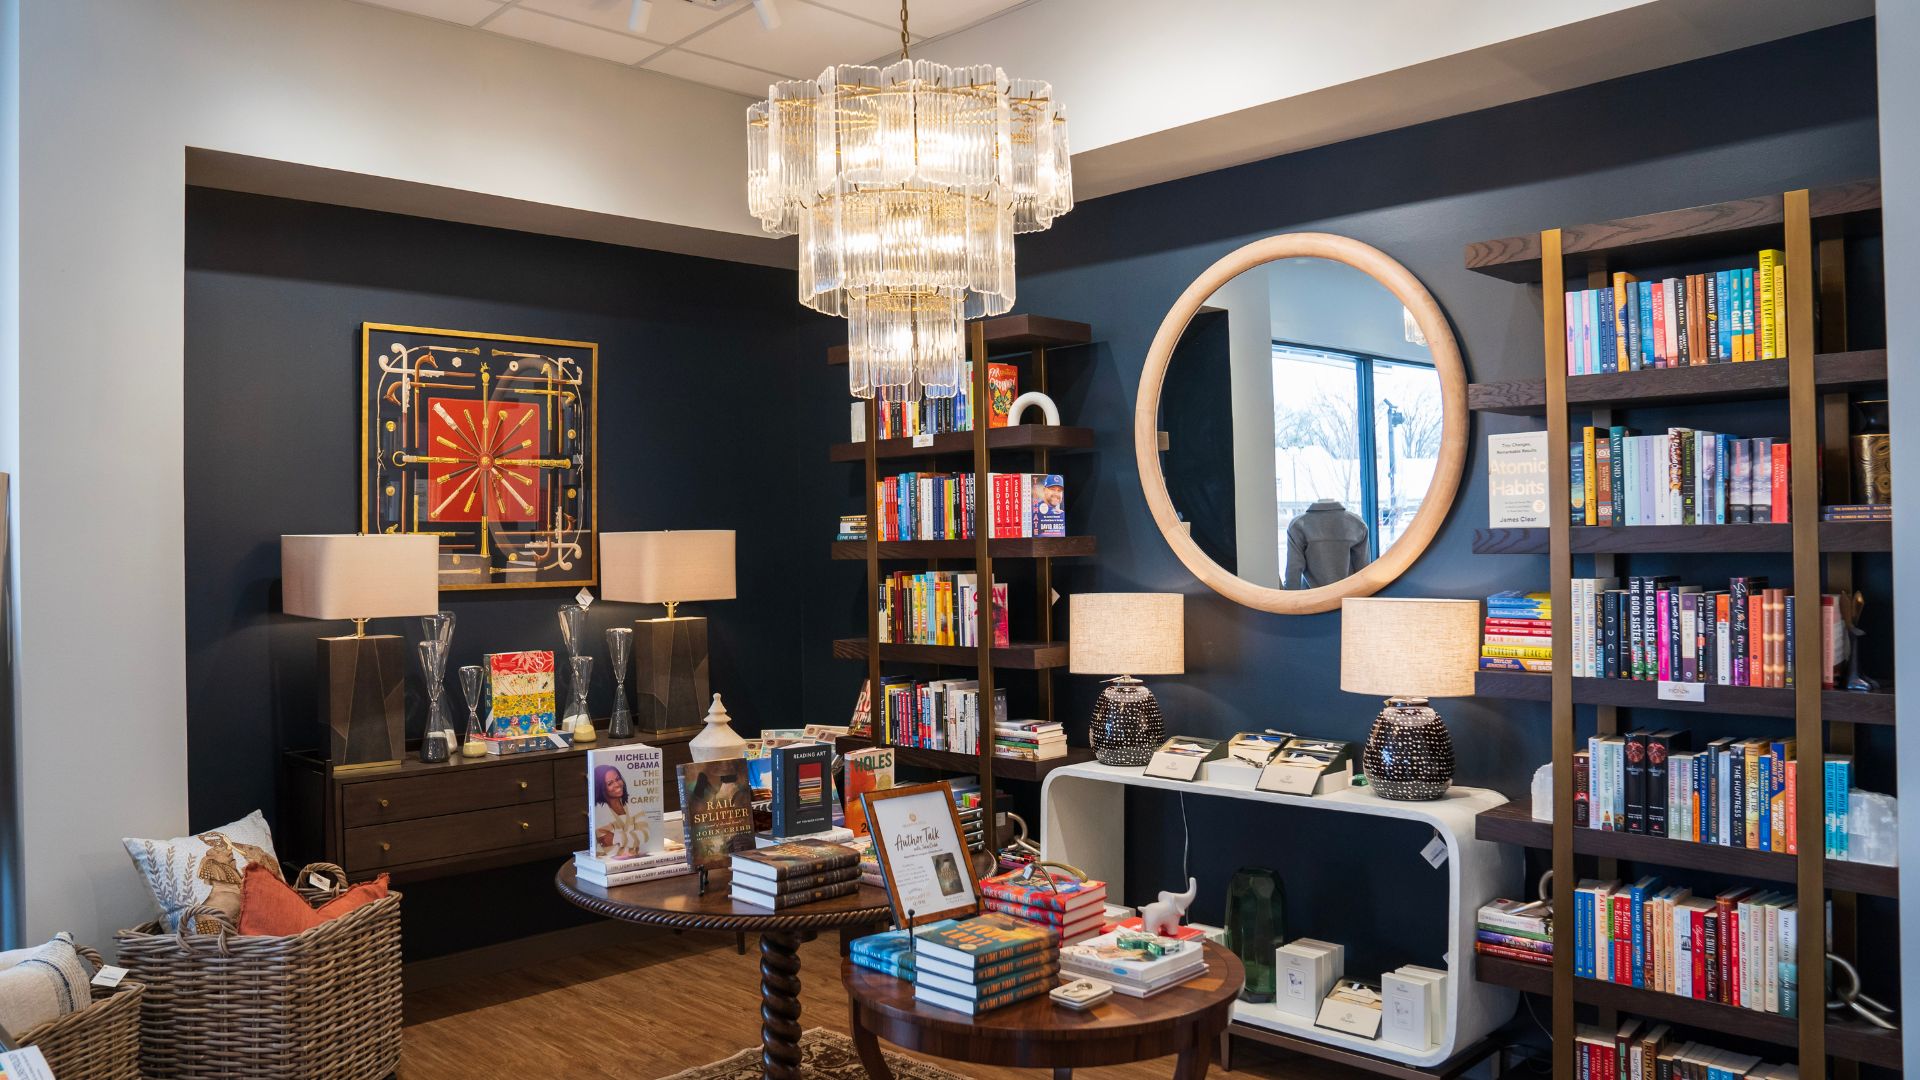 The library at Hearth & Soul features fiction, nonfiction, coffee table books and more.